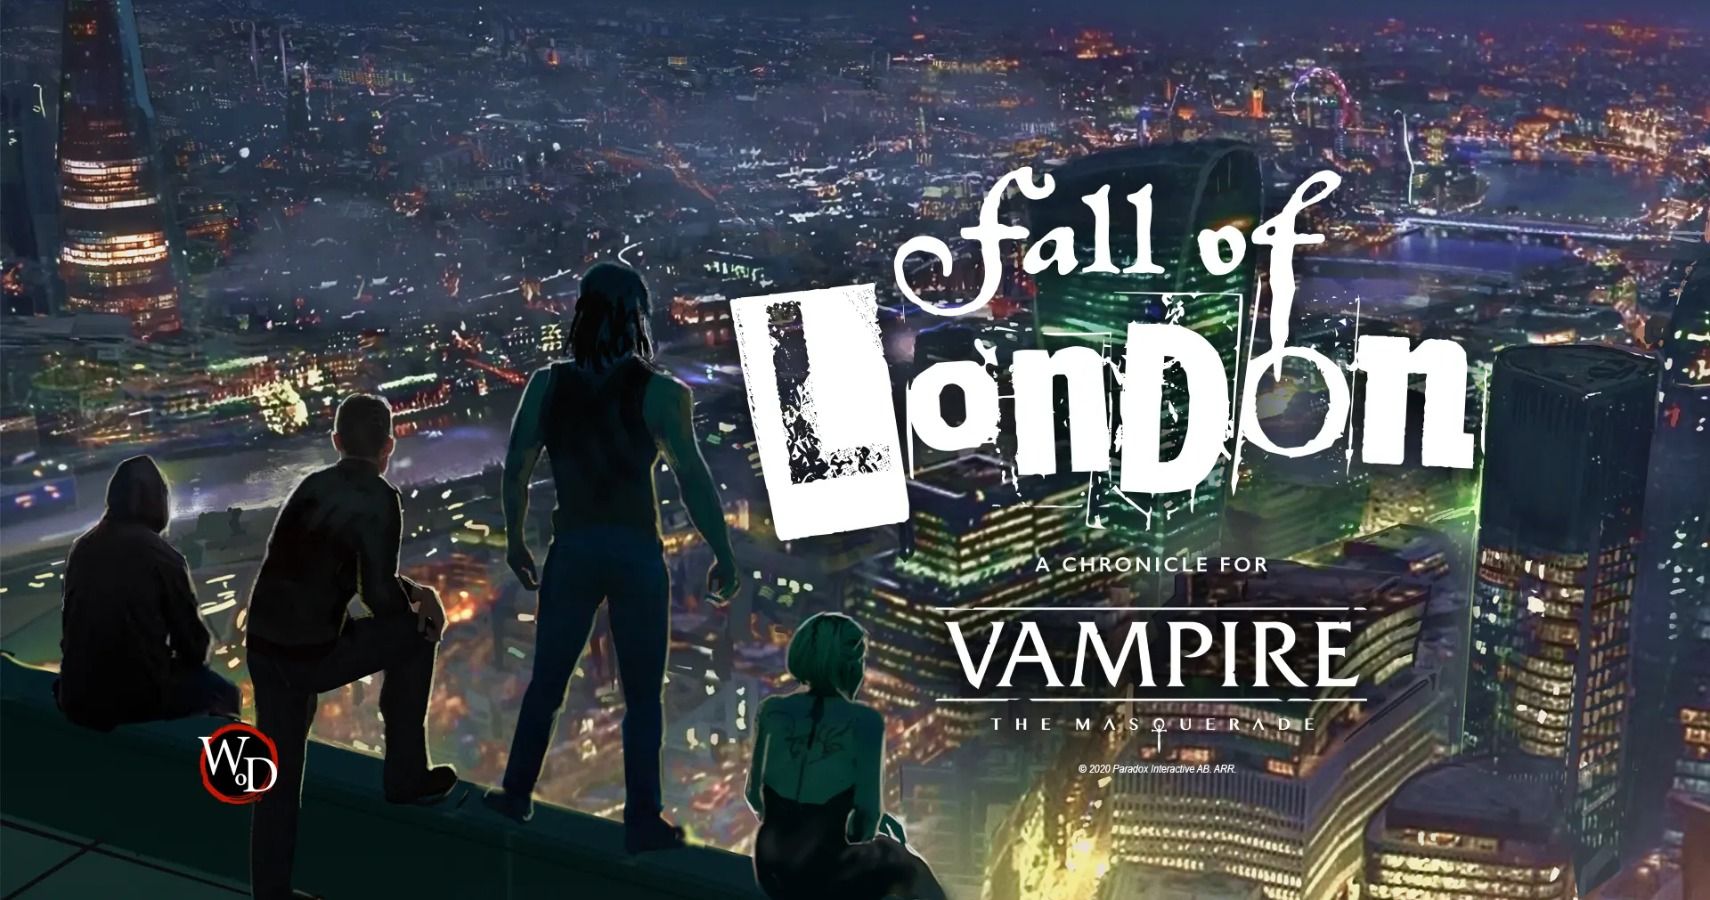 Vampire: The Masquerade's Fall Of London Hardcover Releases In March